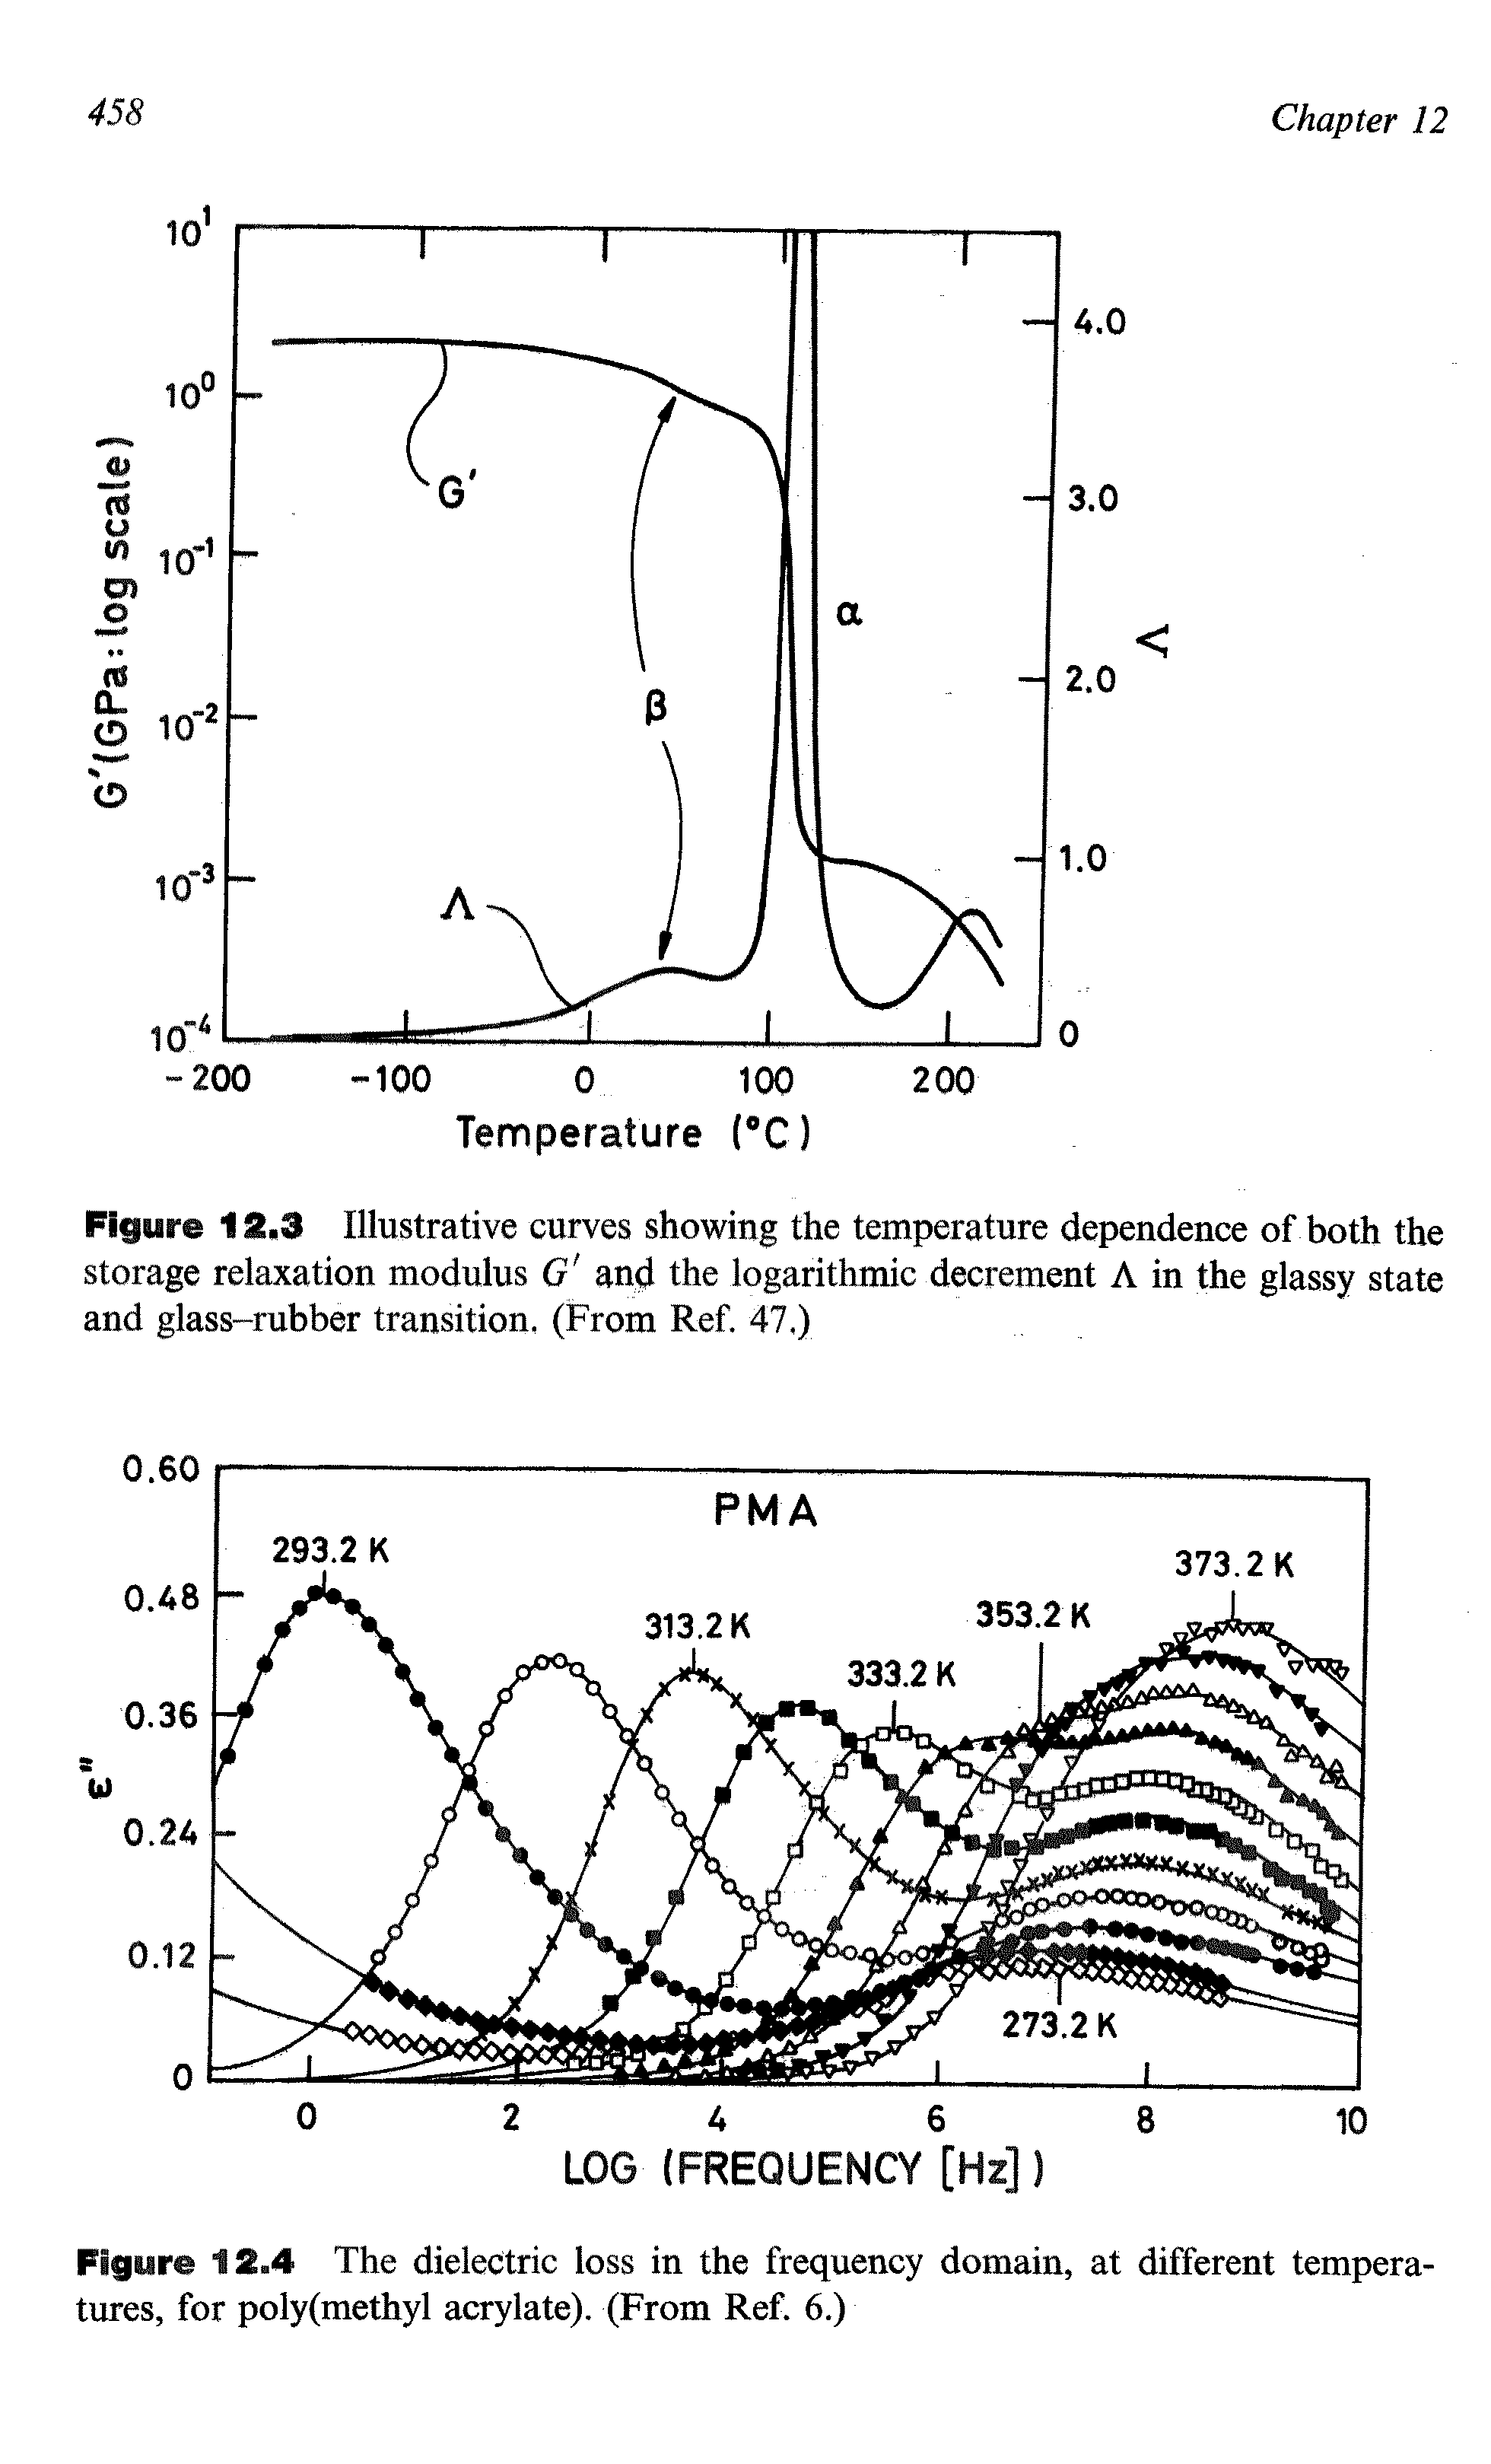 Figure 12t3 Illustrative curves showing the temperature dependence of both the storage relaxation modulus G and the logarithmic decrement A in the glassy state and glass-rubber transition. (From Ref. 47.)...